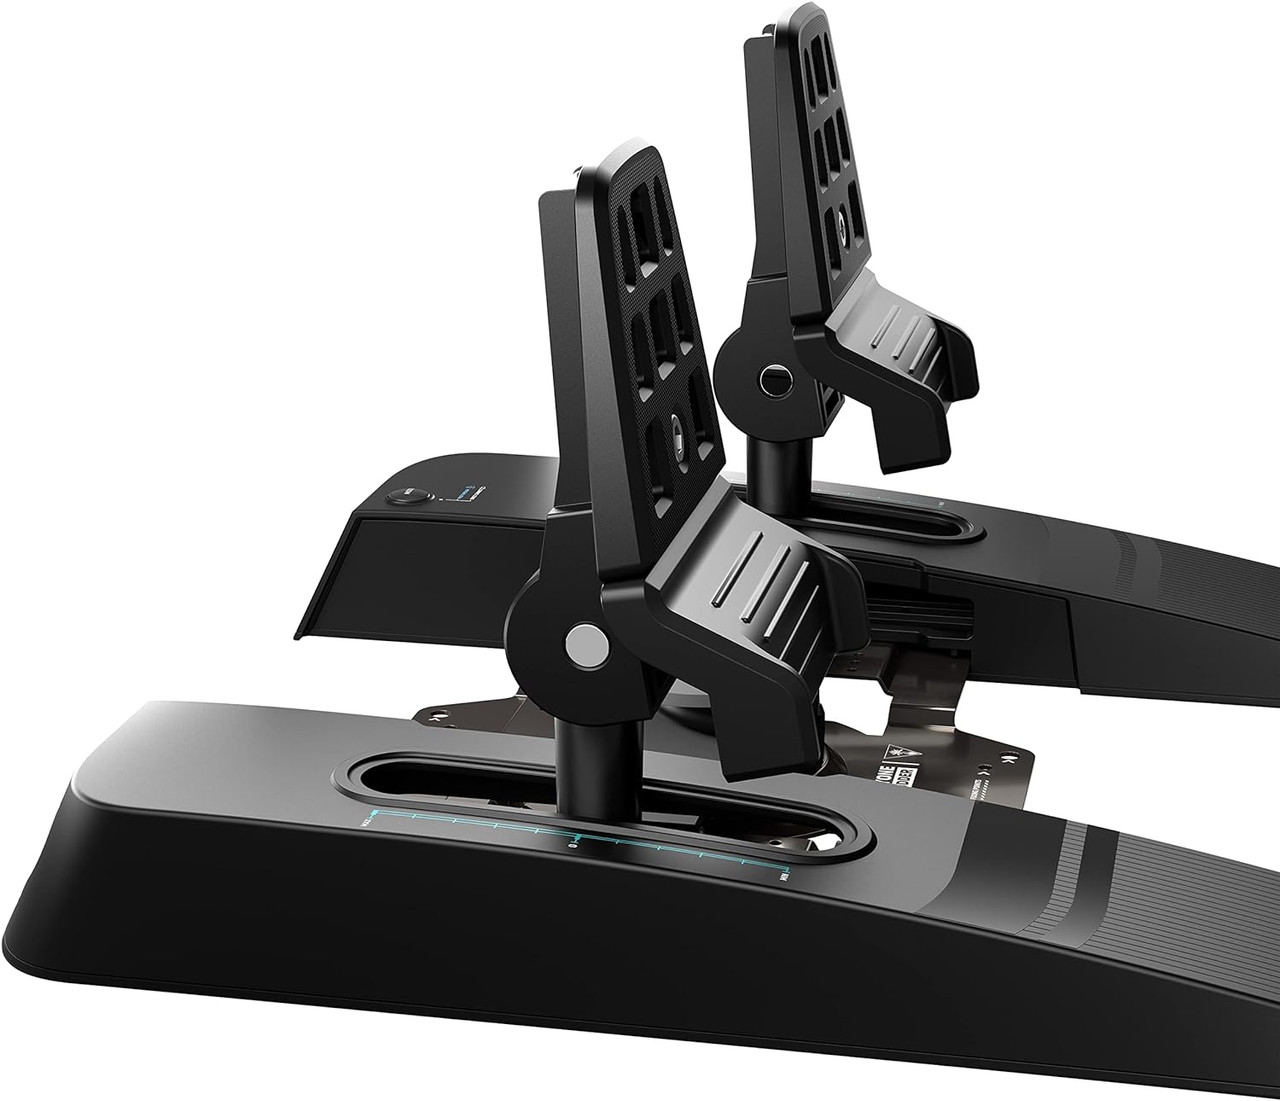 VelocityOne Rudder Pedals for Xbox and PC